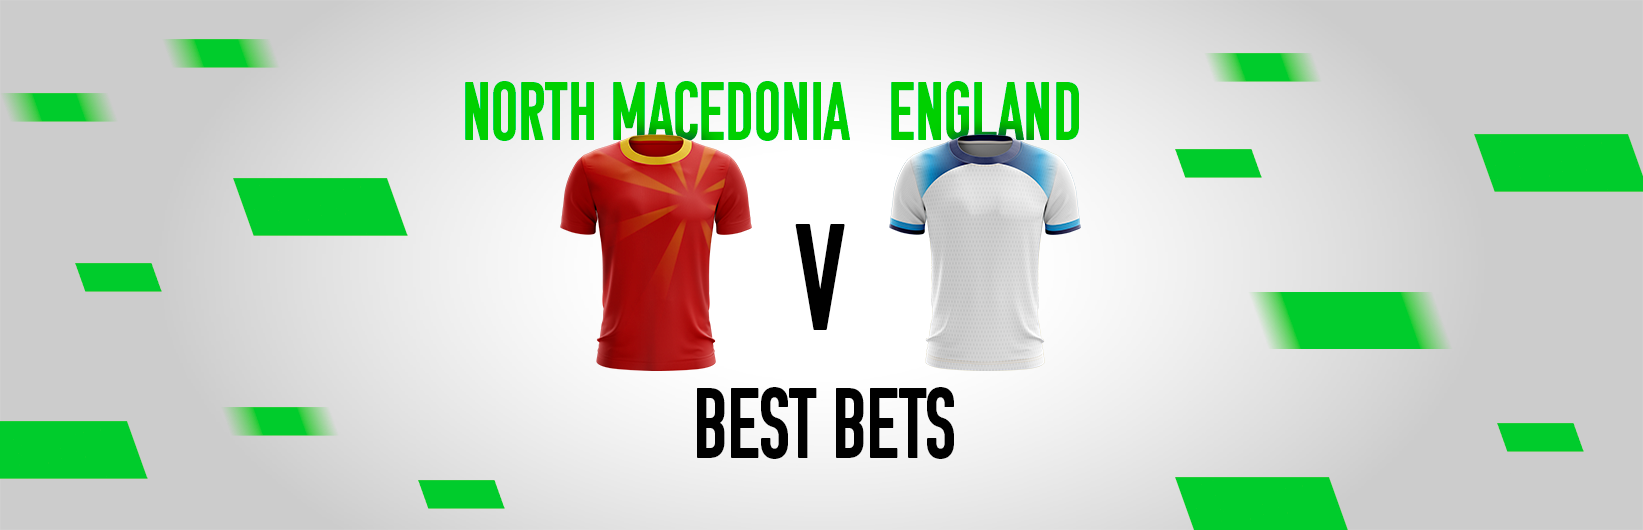 Football tips: Best bets for North Macedonia v England